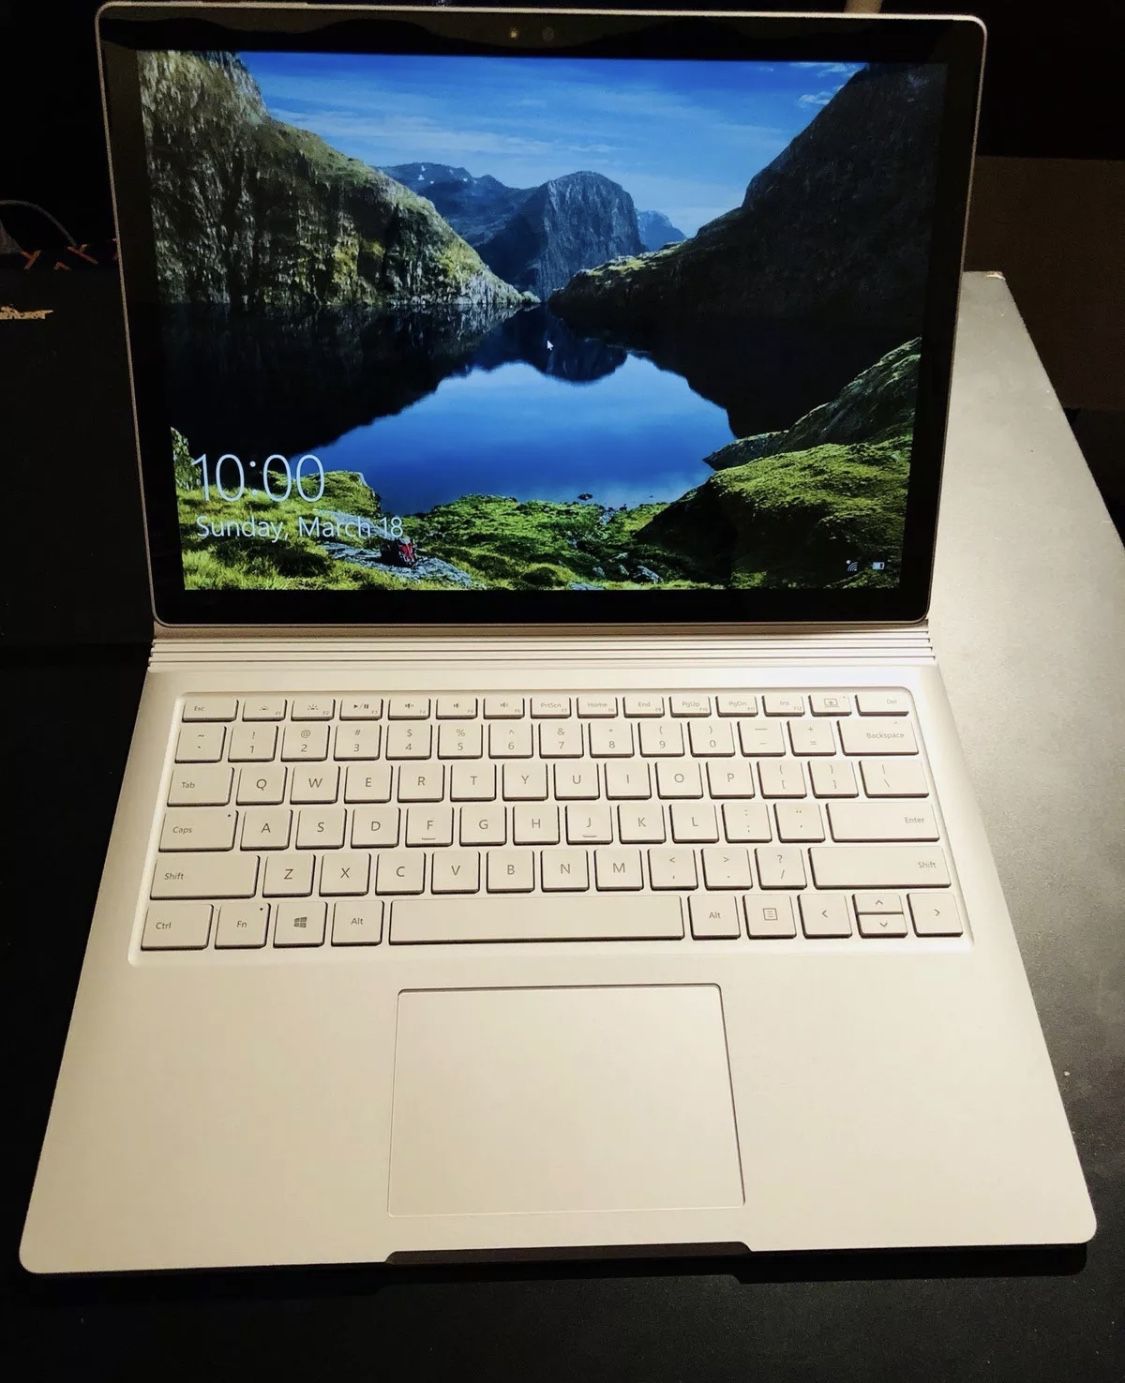 Surface Book 13” i7/8/256gb with dock, mouse and pen